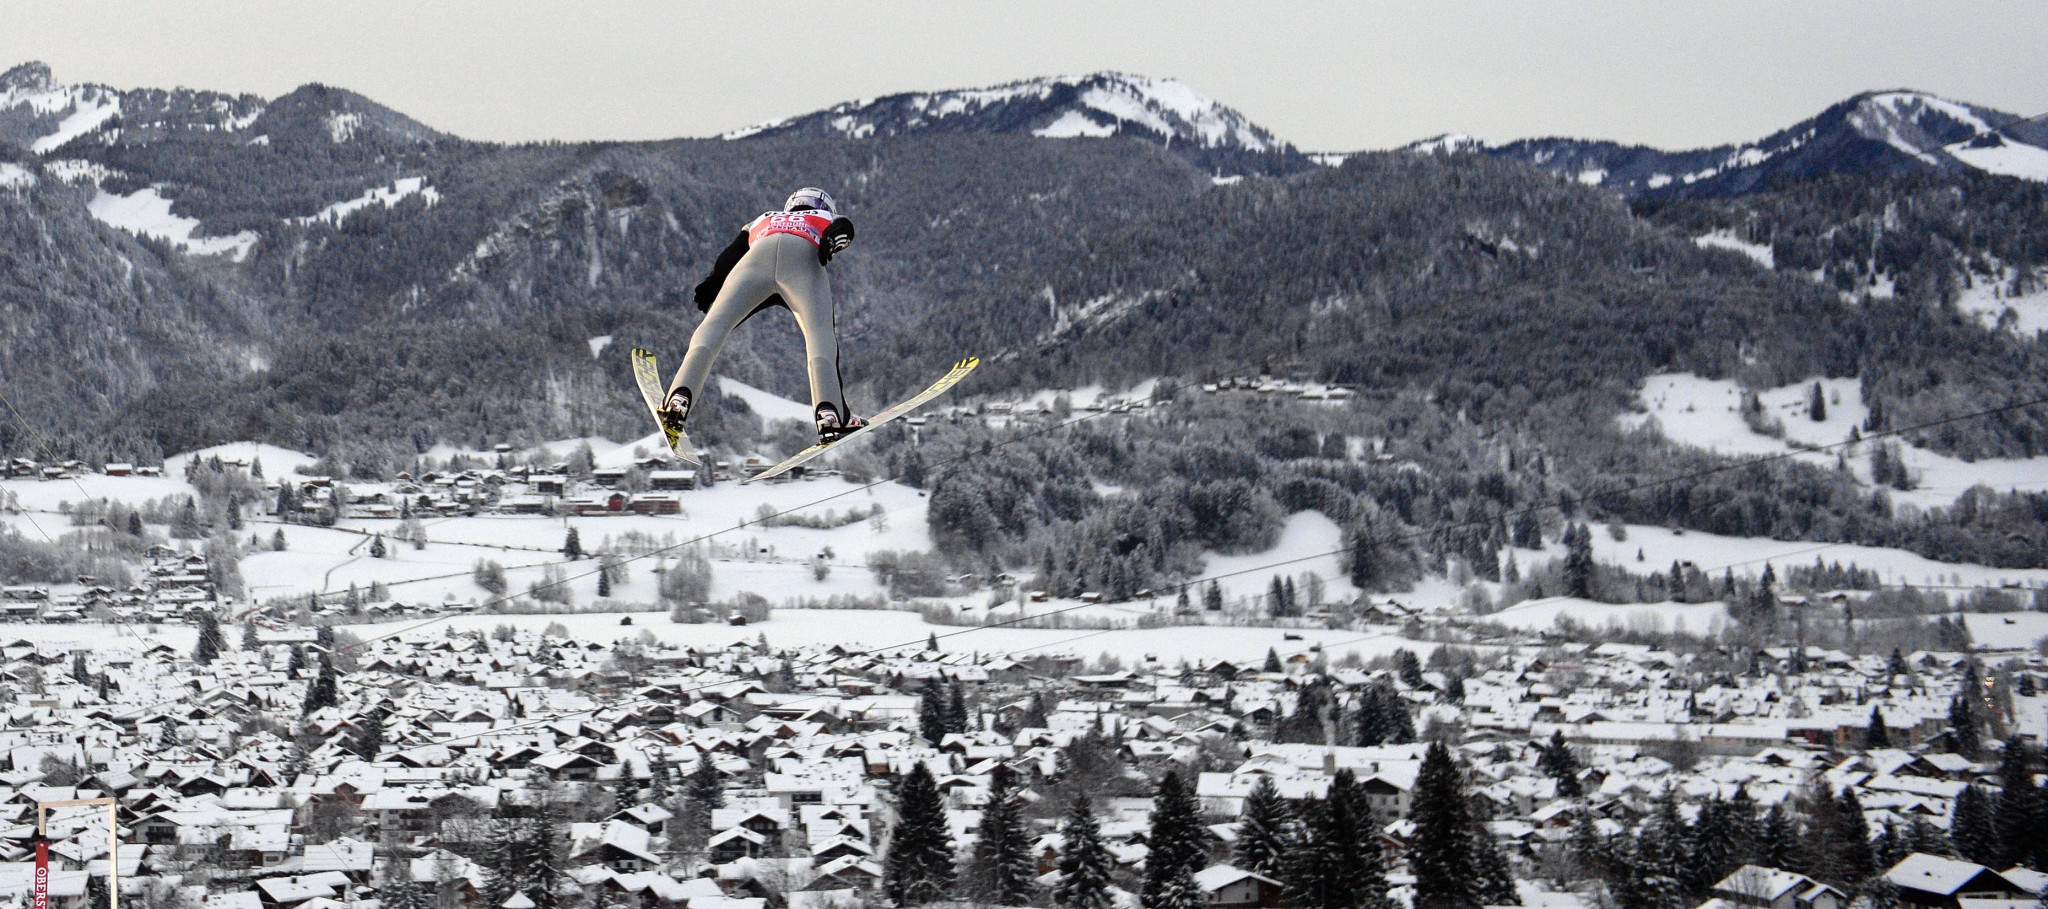 German Skispringer Andreas Wellinger soars through the air during in Oberstdorf, southern Germany, during the Four-Hills Ski Jumping tournament ©Getty Images